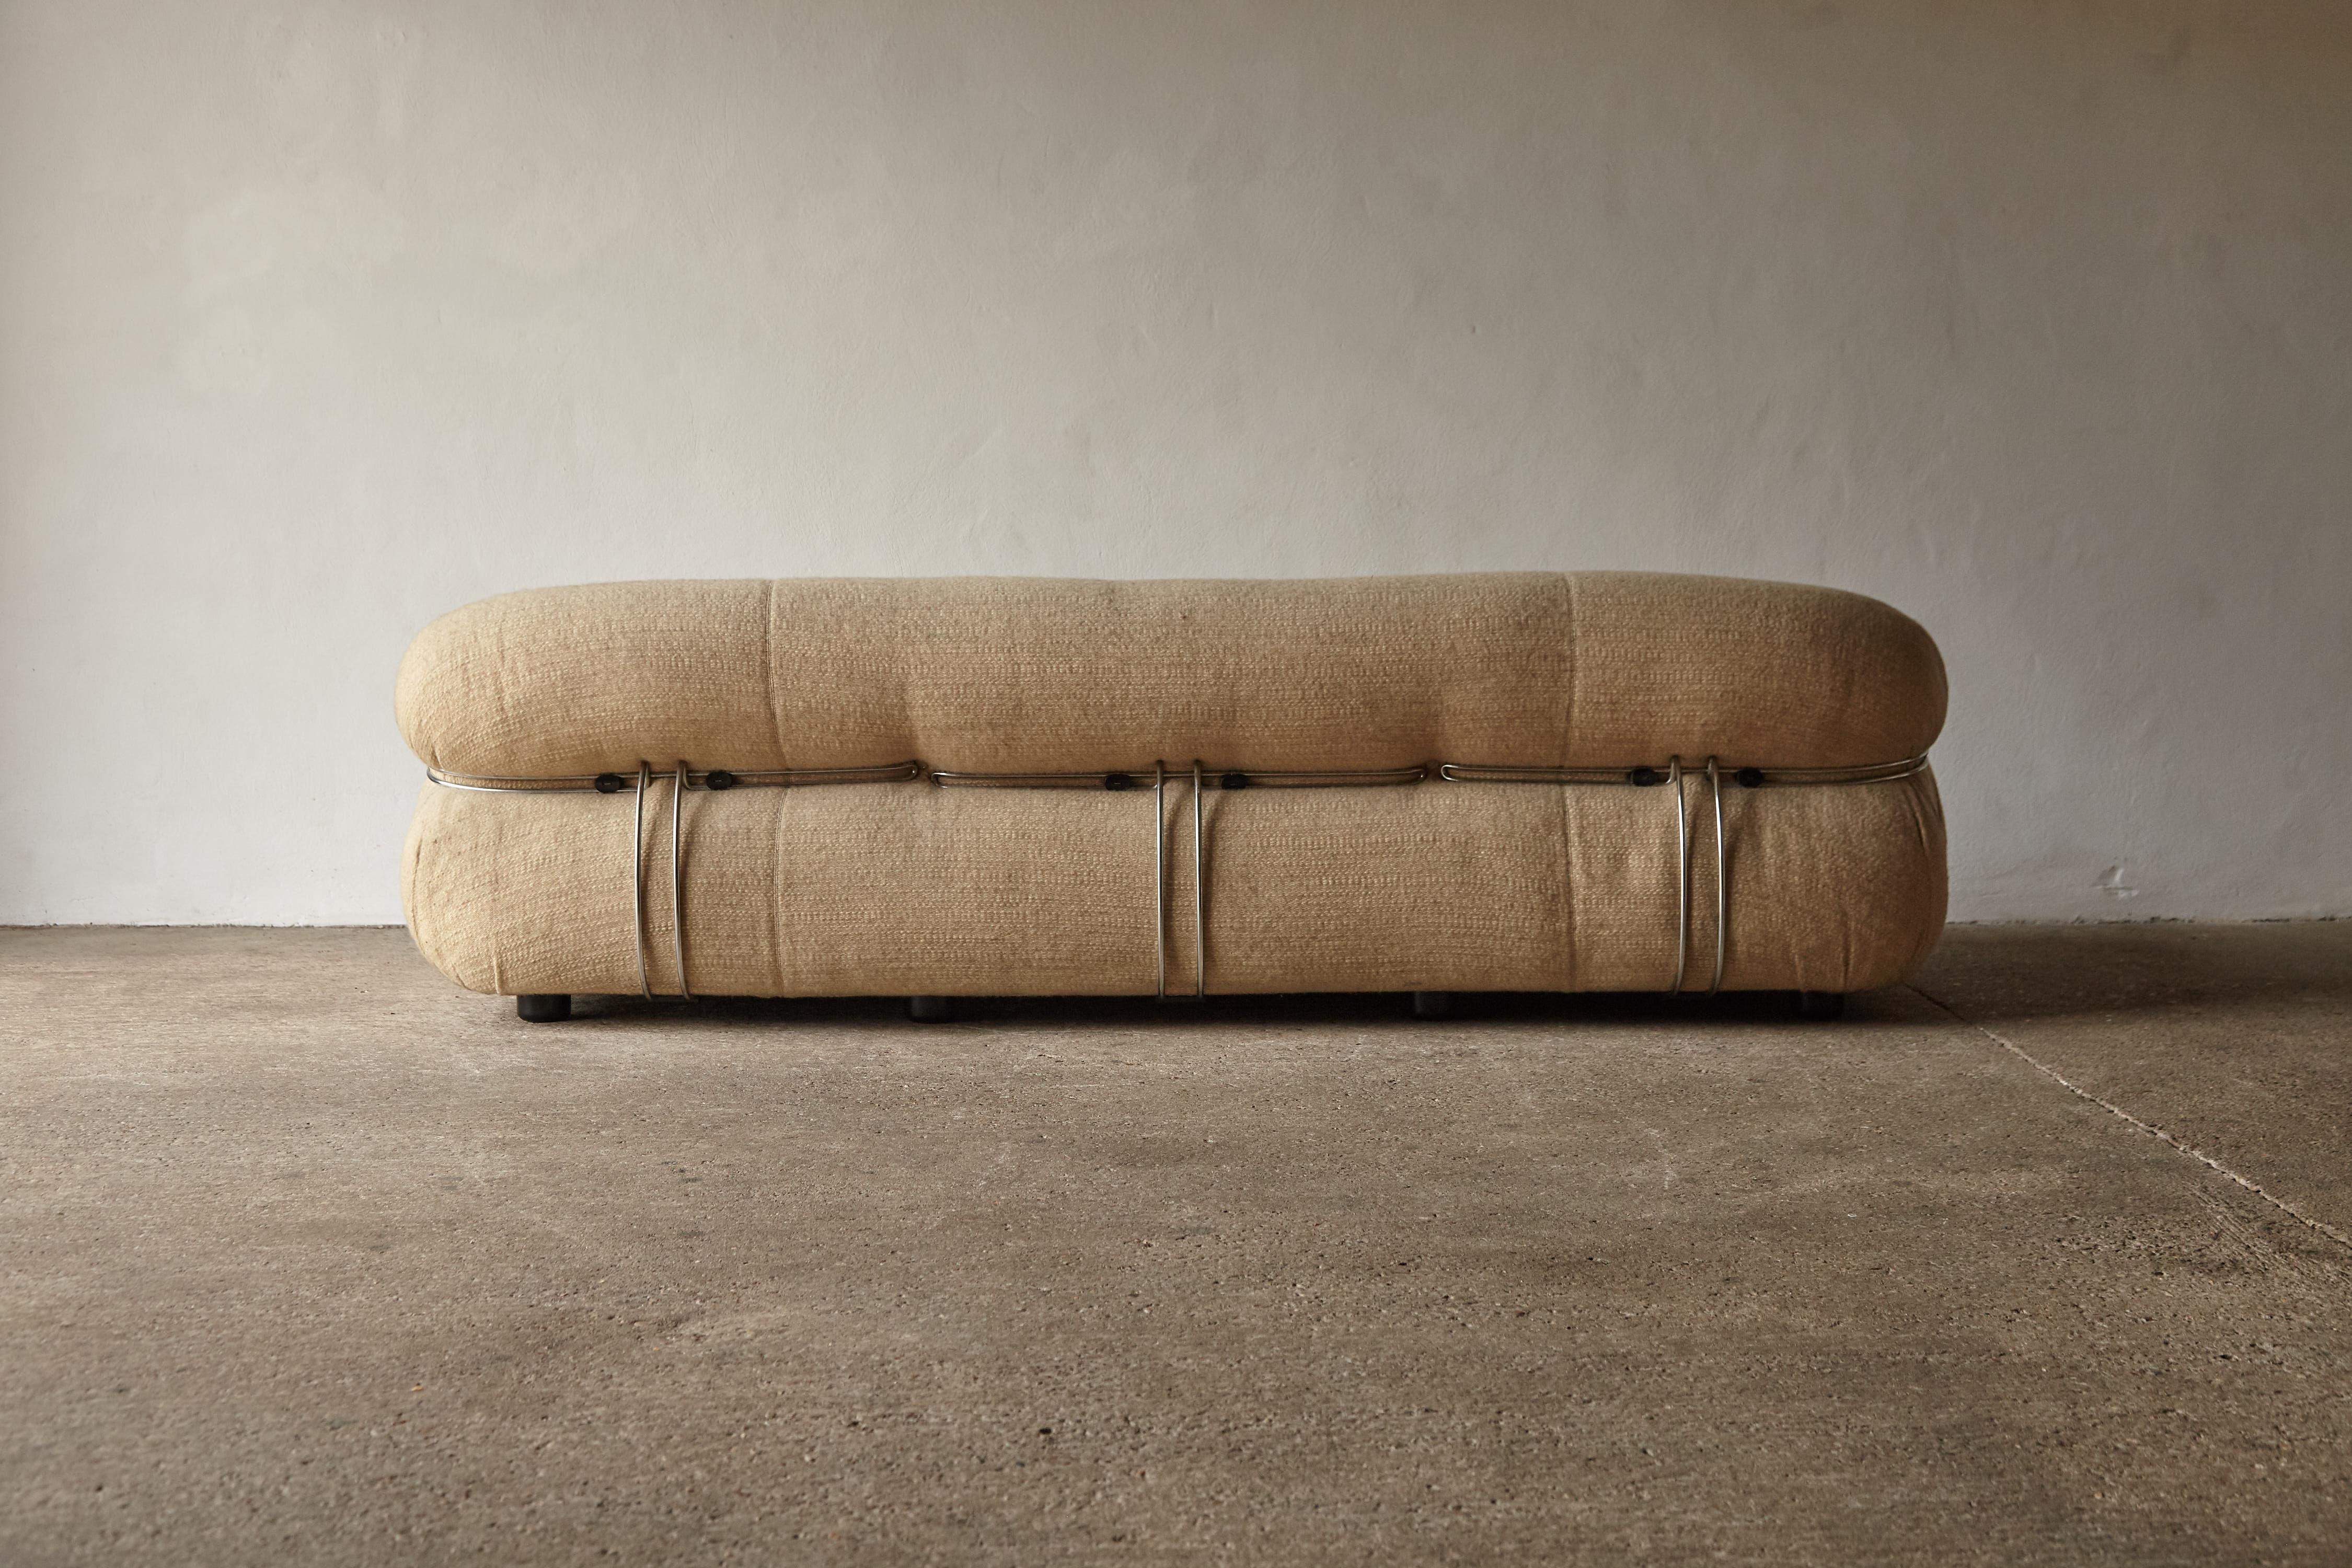 20th Century Soriana Sofa by Afra & Tobia Scarpa for Cassina, Original Fabric, Italy, 1970s For Sale